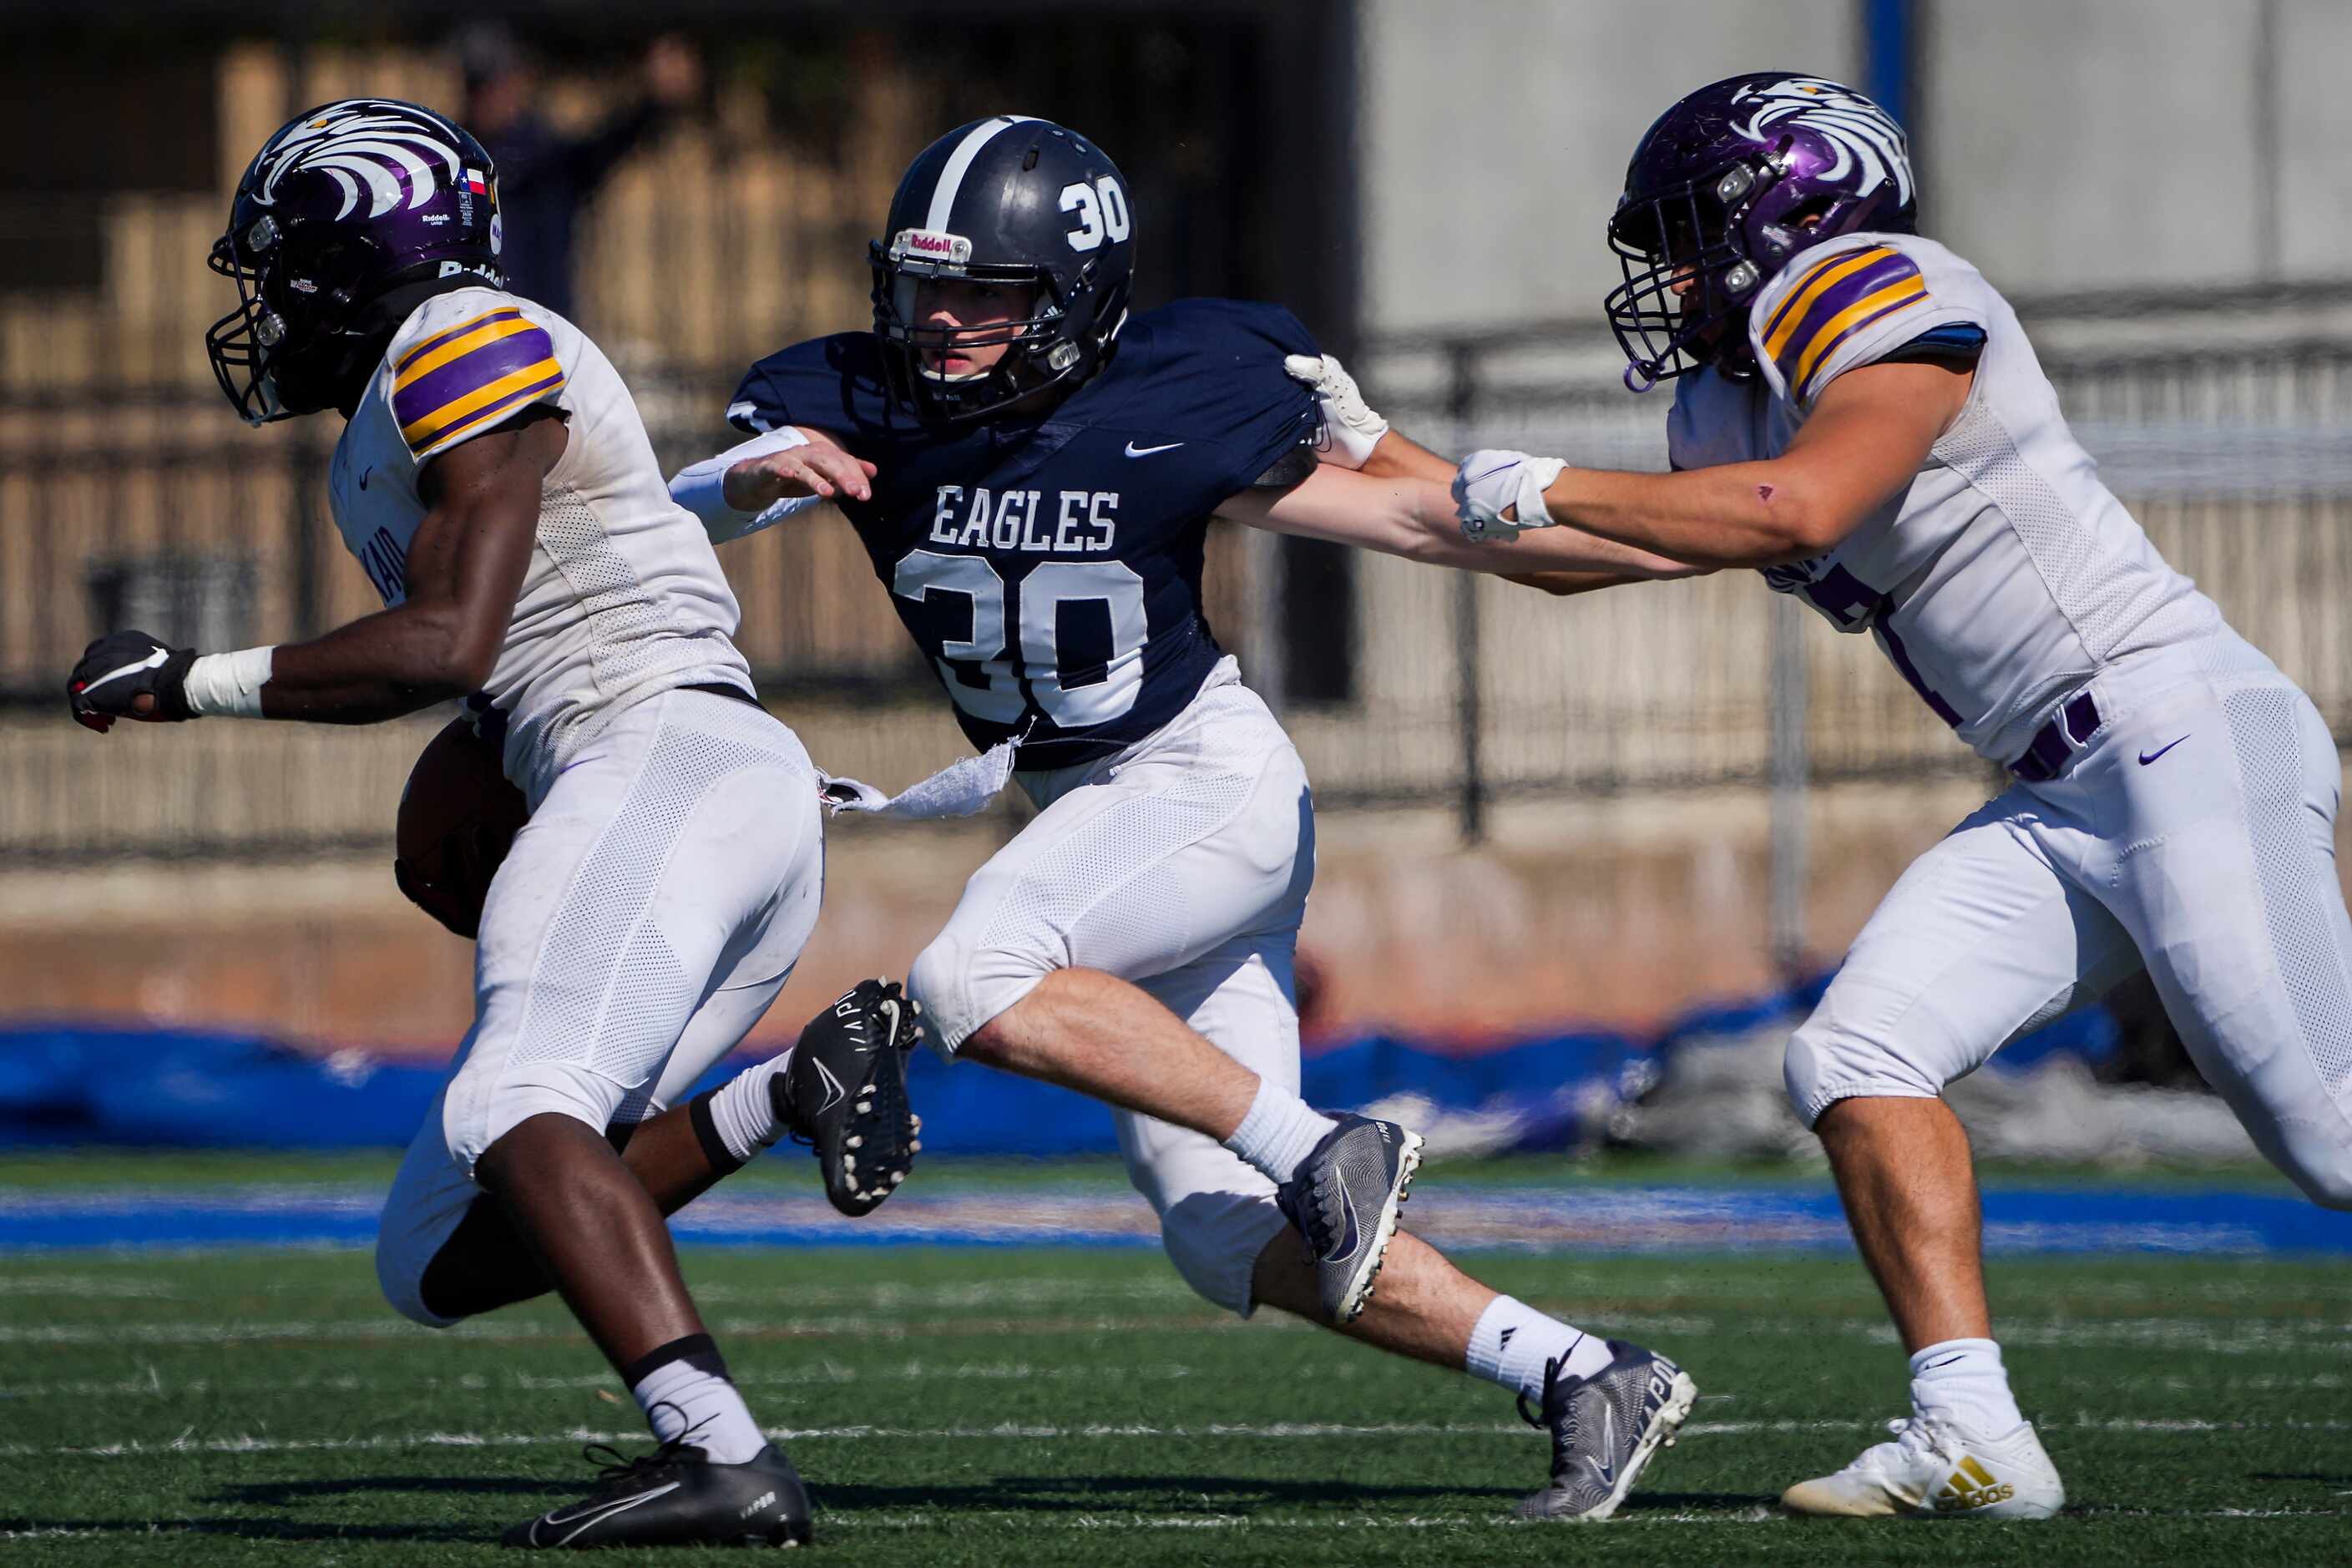 Houston Kinkaid wide receiver Dillon Bell (6) gets past Episcopal School of Dallas...